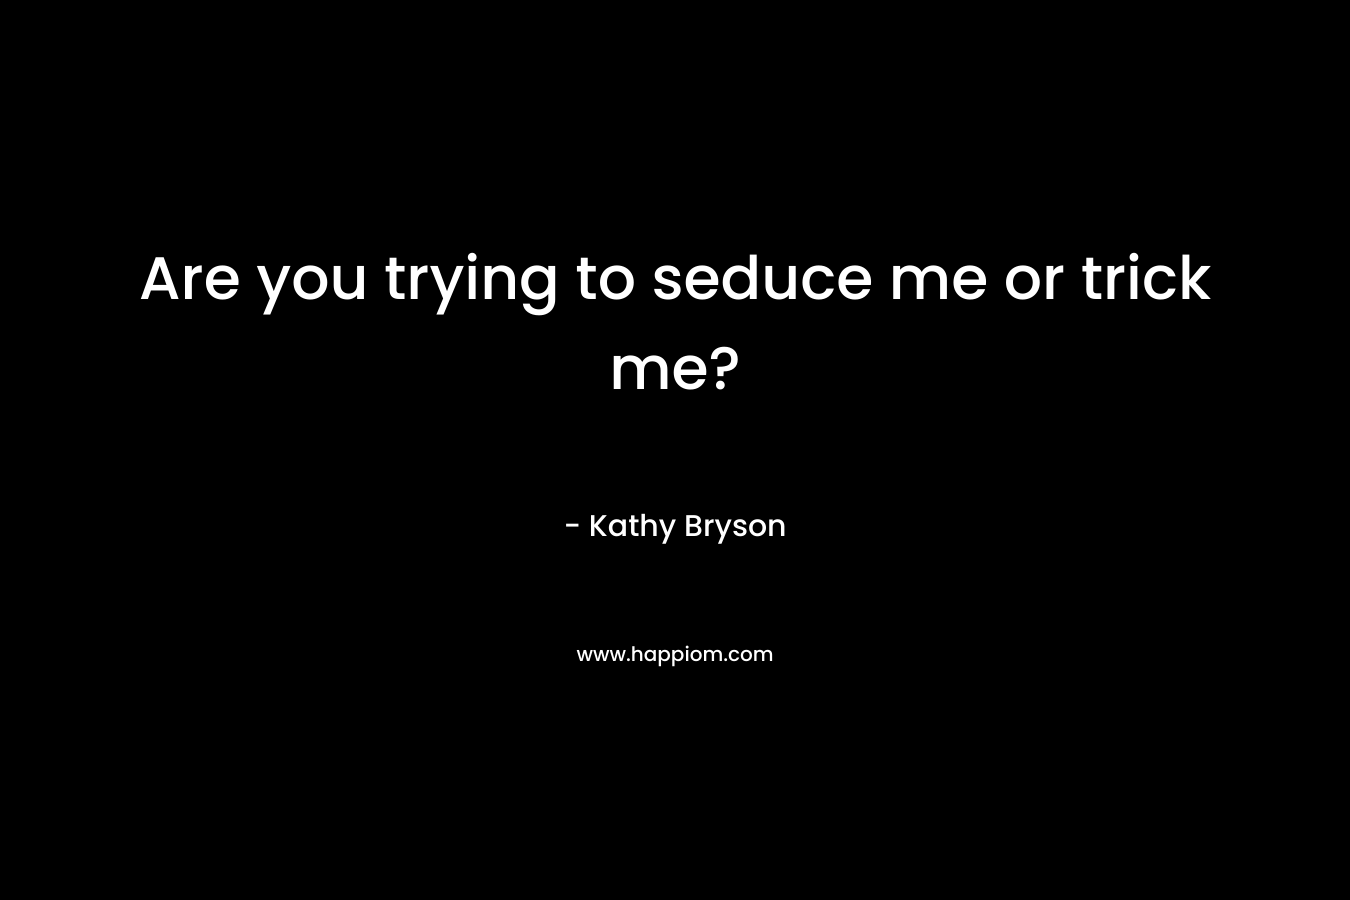 Are you trying to seduce me or trick me? – Kathy Bryson